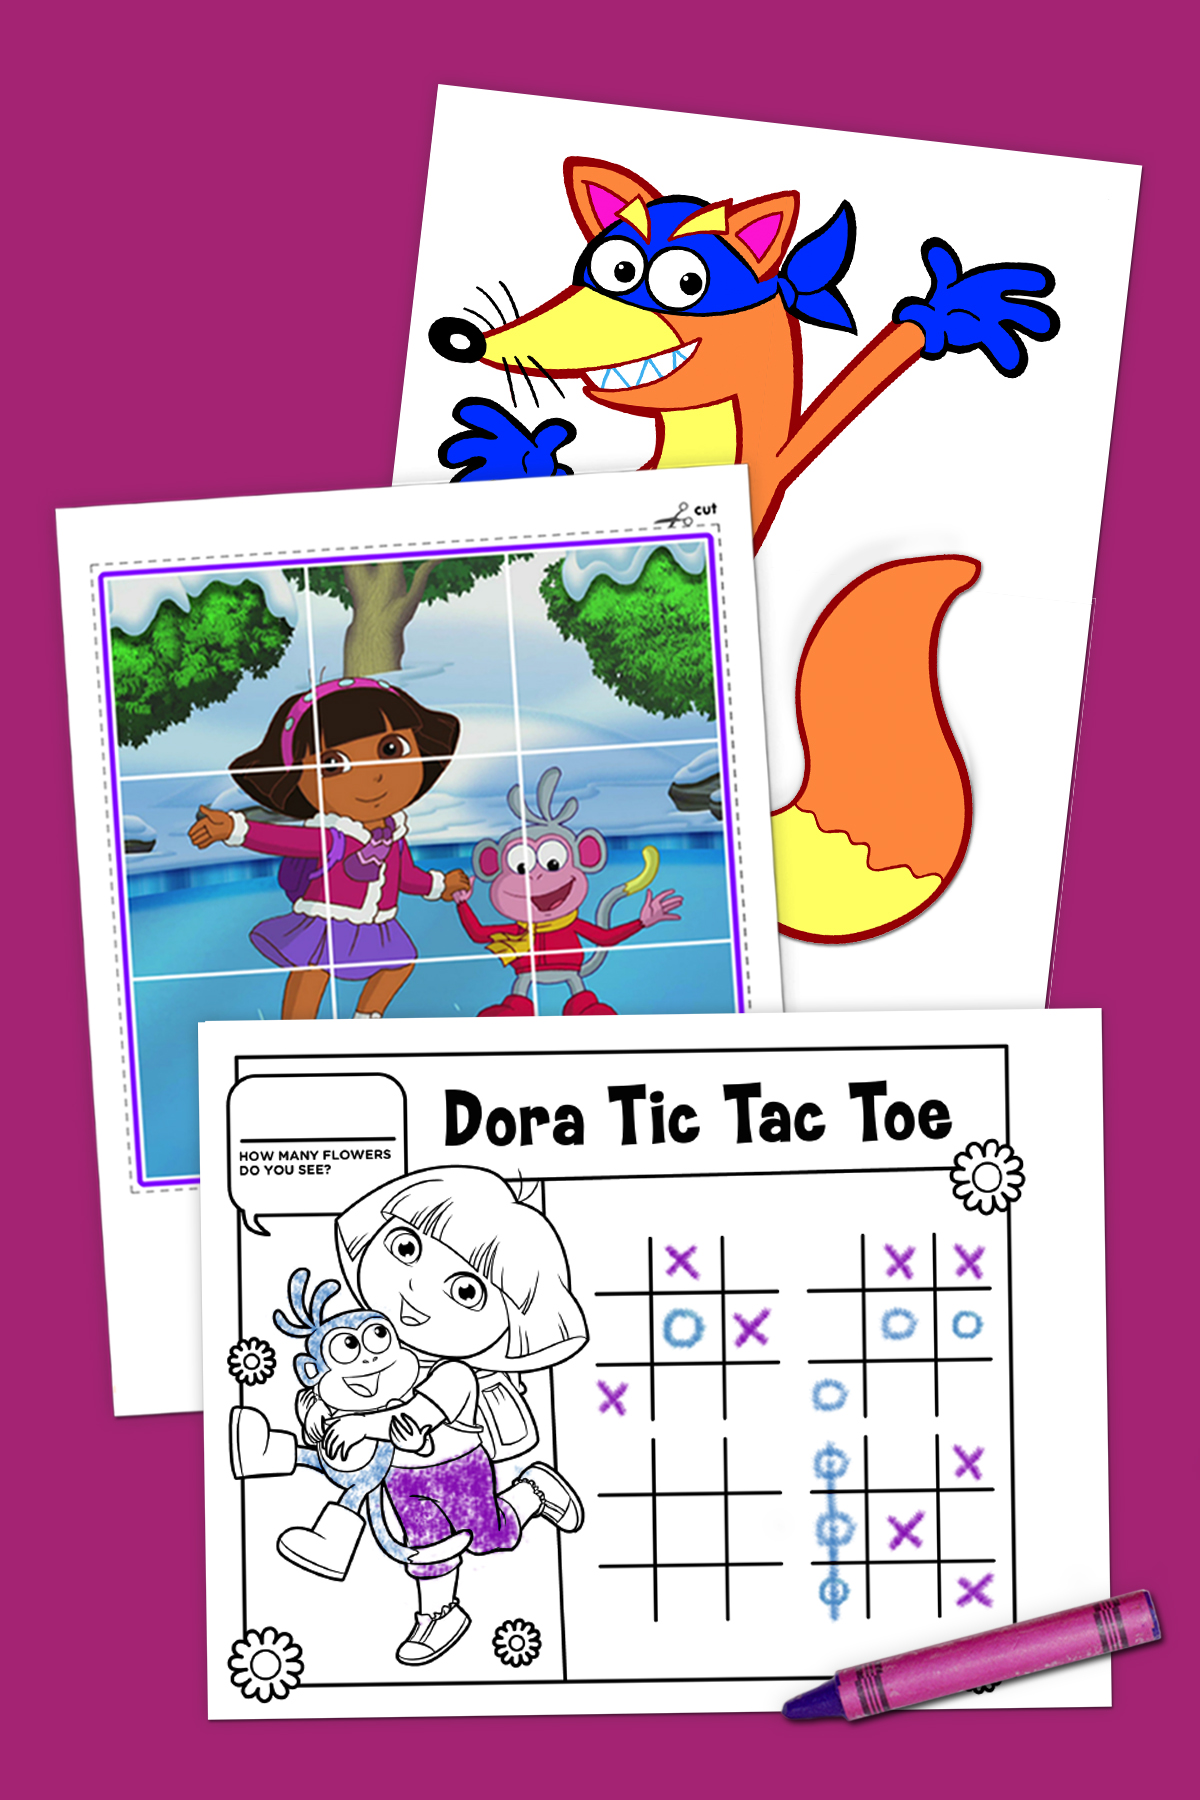 Top 10 Dora Printables of All Time